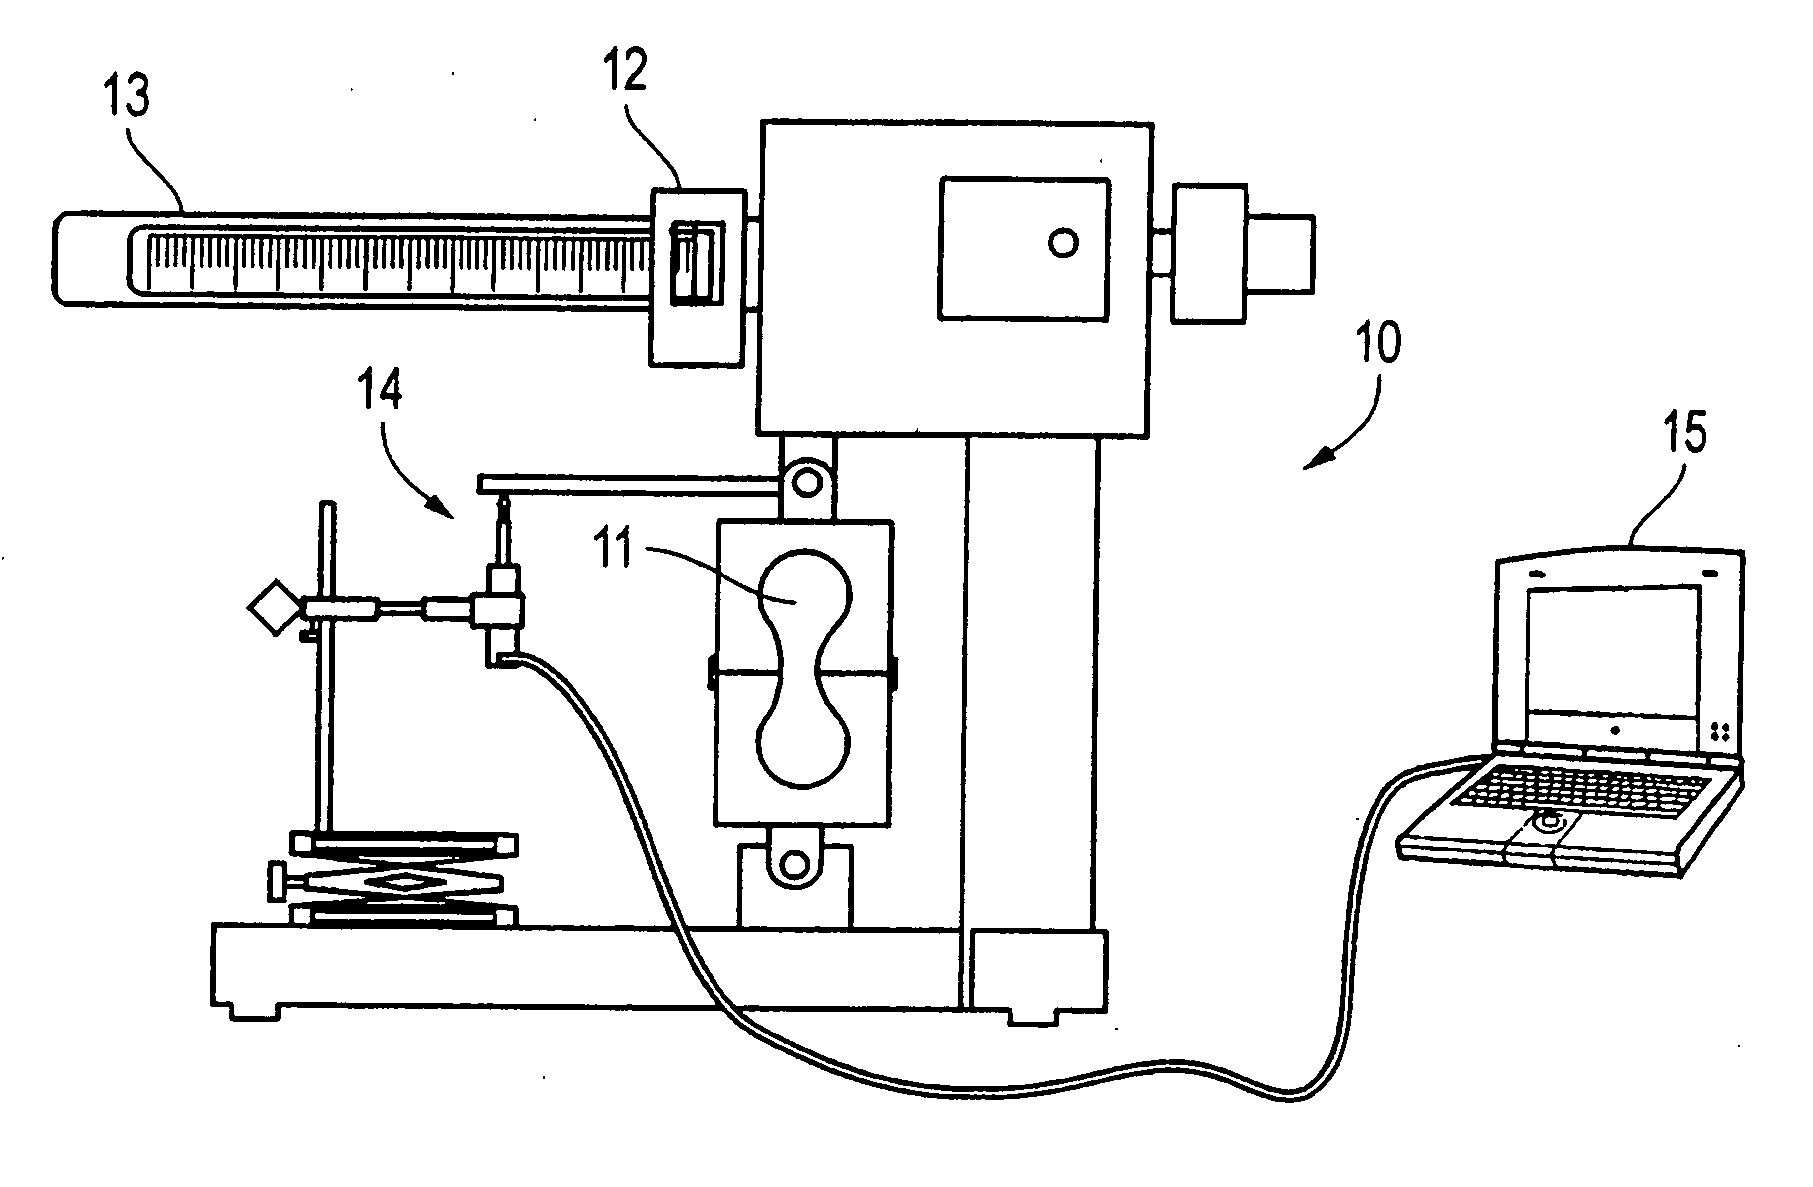 Testing apparatus and method of deriving young's modulus from tensile stress/strain relationships